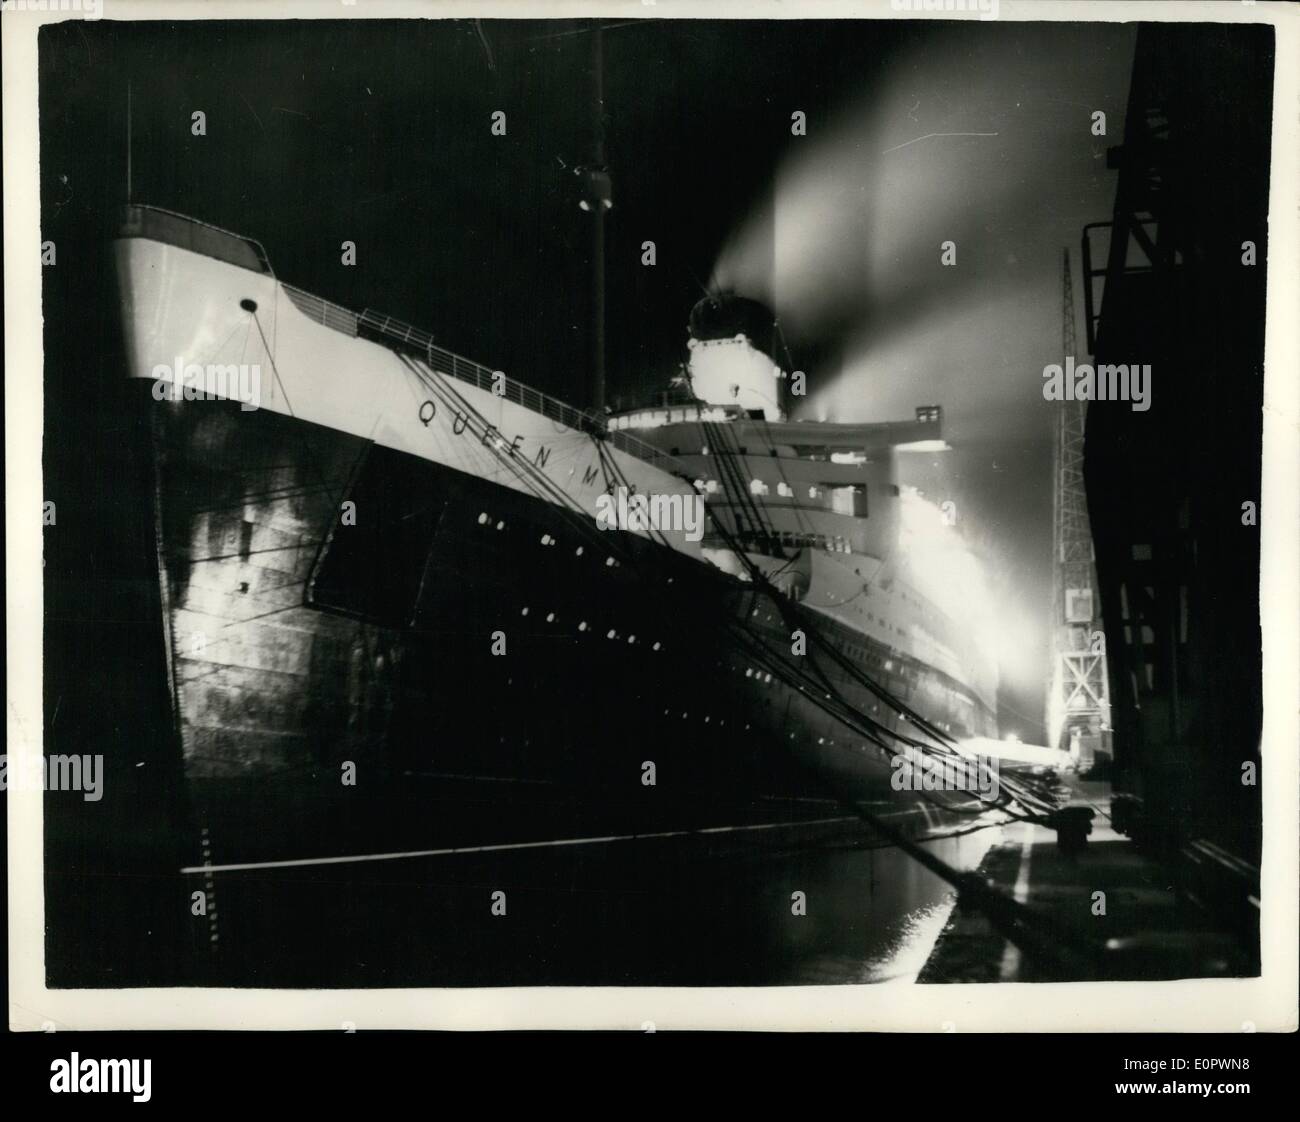 Mar. 03, 1957 - The S.S. Queen Mary Leaves Southampton For The U.S. In Spite Of Strike Ban. Photo Shows: The S.S. Queen Mary seen when about to leave Southampton in the early hors of yesterday.. She left in spite of the ban placedon her by the shipbuilding strikers.. They claim she was ''black'' as repairs had not been completed when she left the repair yards on Saturday - and therefor should remain in Dock. Stock Photo